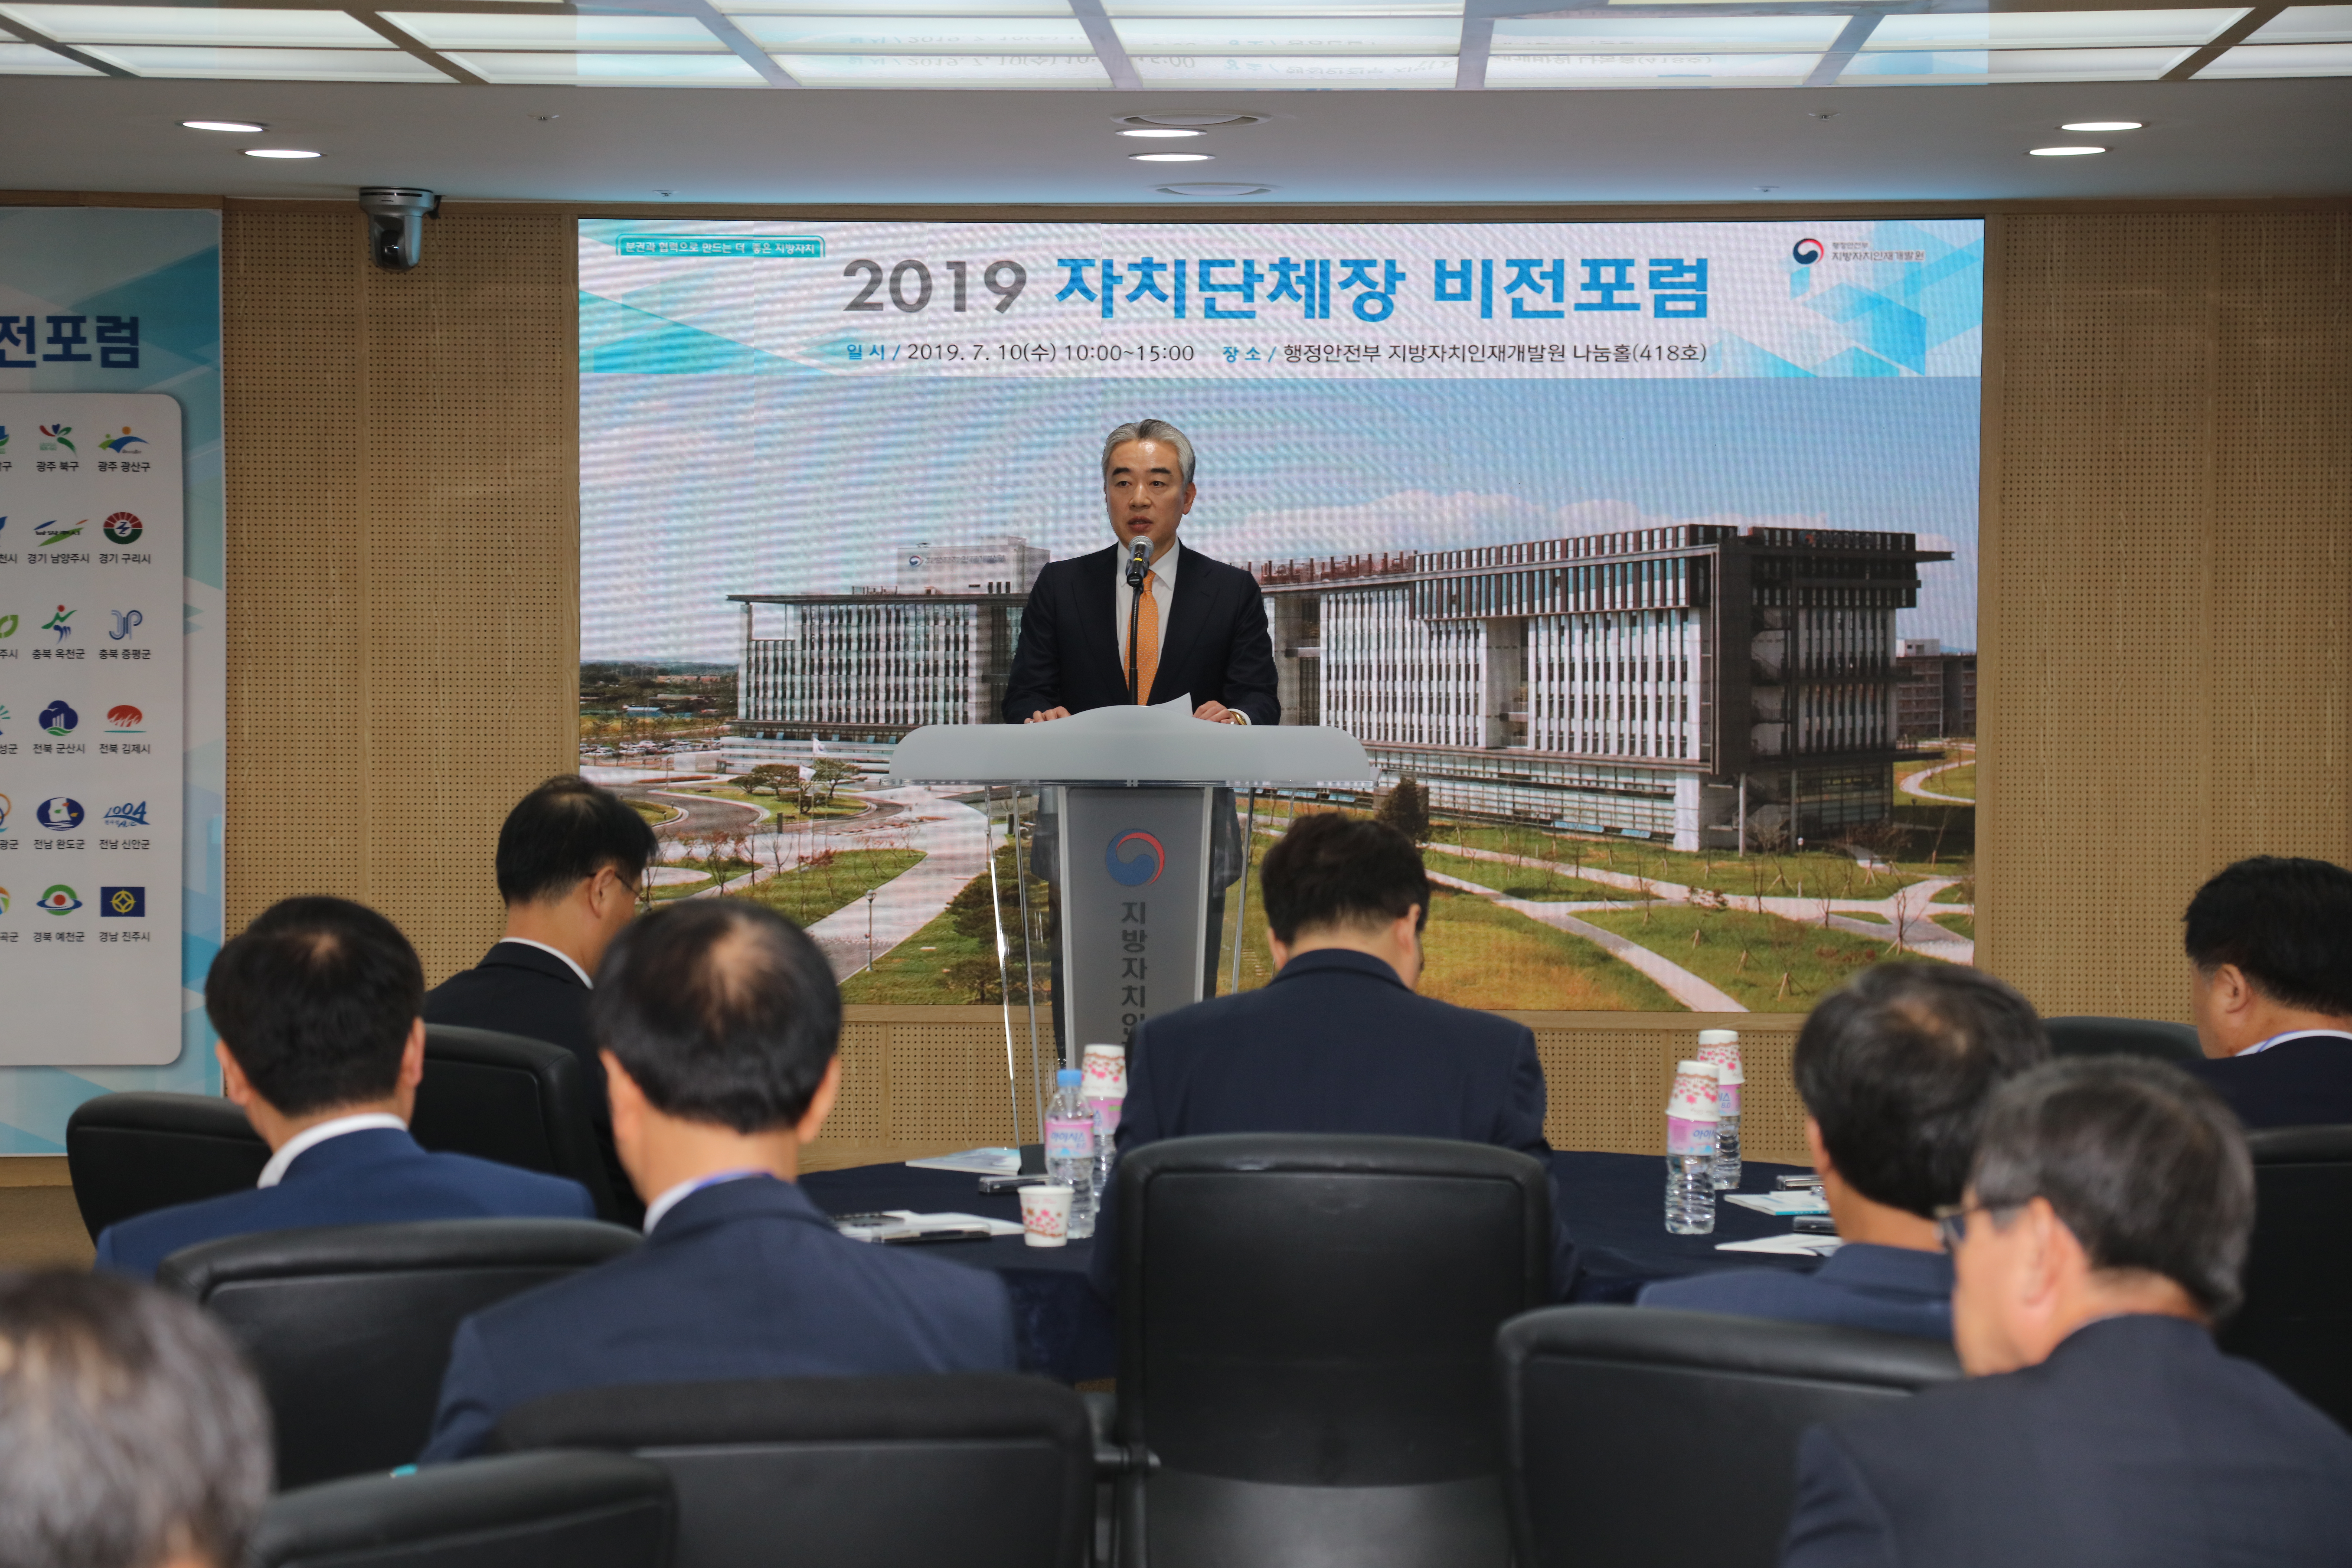 LOGODI hosts %26%2339%3BVision Forum 2019%26%2339%3B with heads of local governments across the nation 큰 이미지[마우스 클릭 시 창닫기]